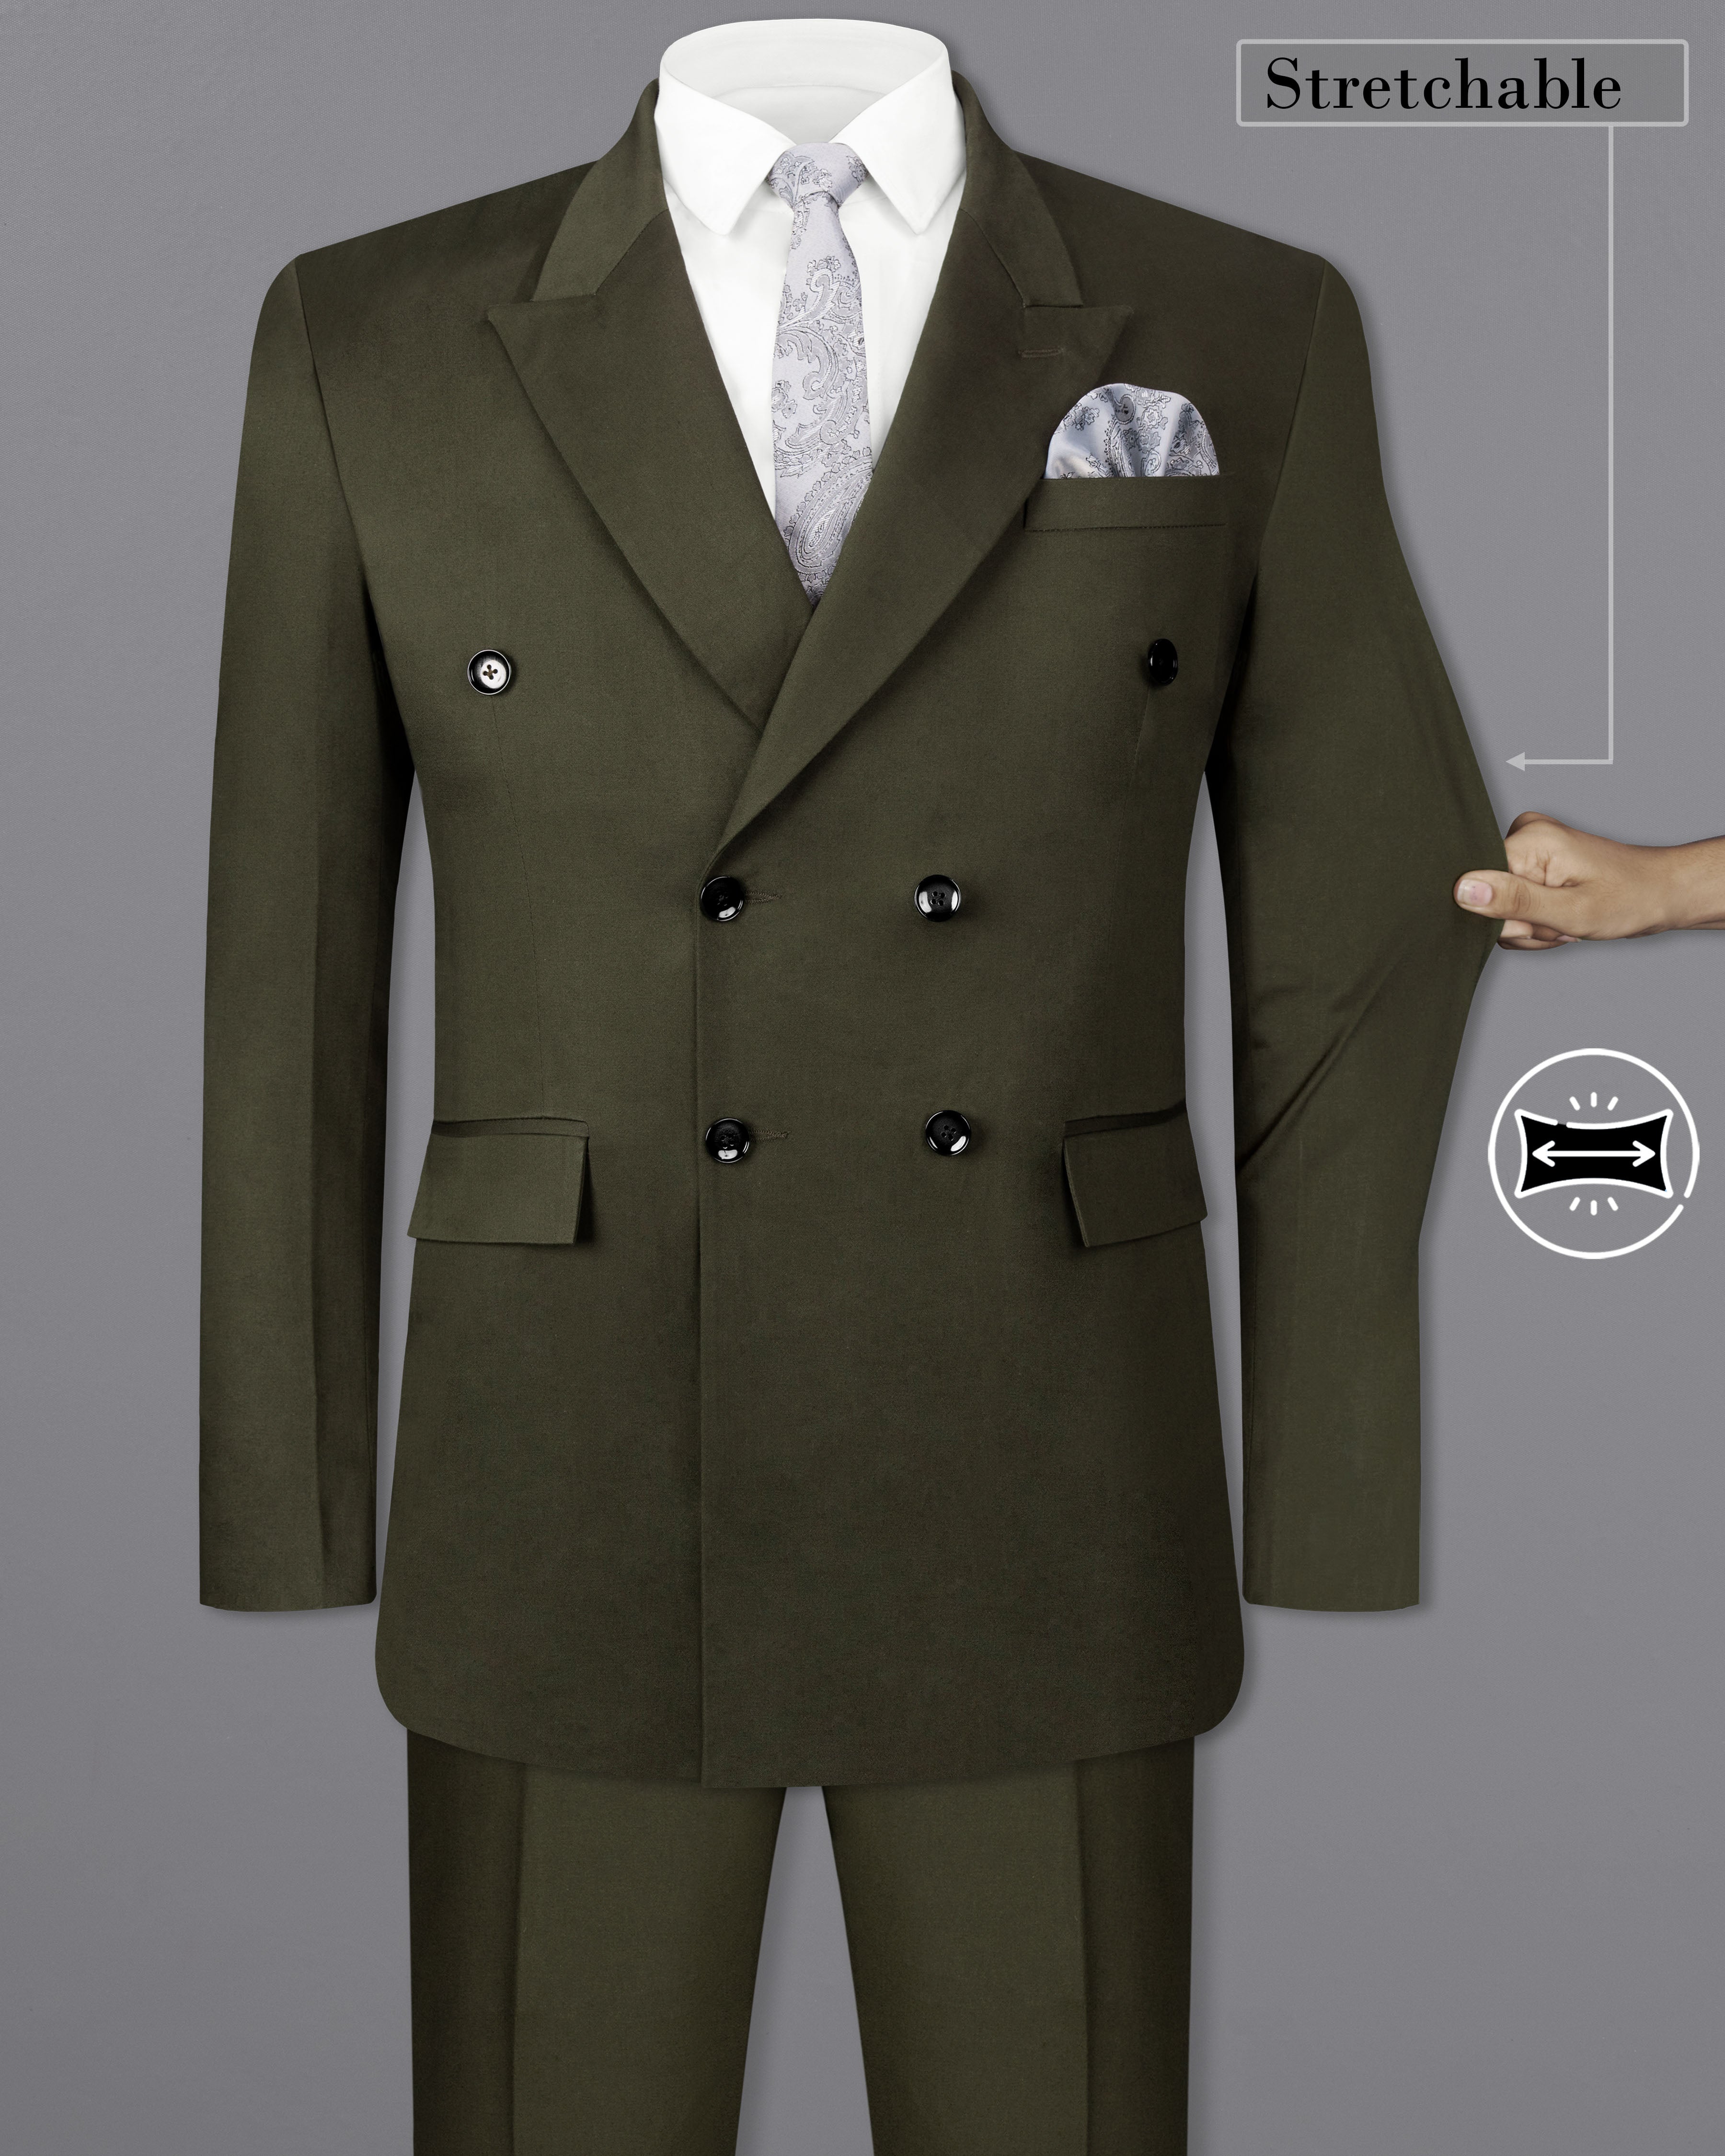 Taupe Green Solid Stretchable Premium Cotton Double Breasted traveler Suit ST2643-DB-36,ST2643-DB-38,ST2643-DB-40,ST2643-DB-42,ST2643-DB-44,ST2643-DB-46,ST2643-DB-48,ST2643-DB-50,ST2643-DB-52,ST2643-DB-54,ST2643-DB-56,ST2643-DB-58,ST2643-DB-60